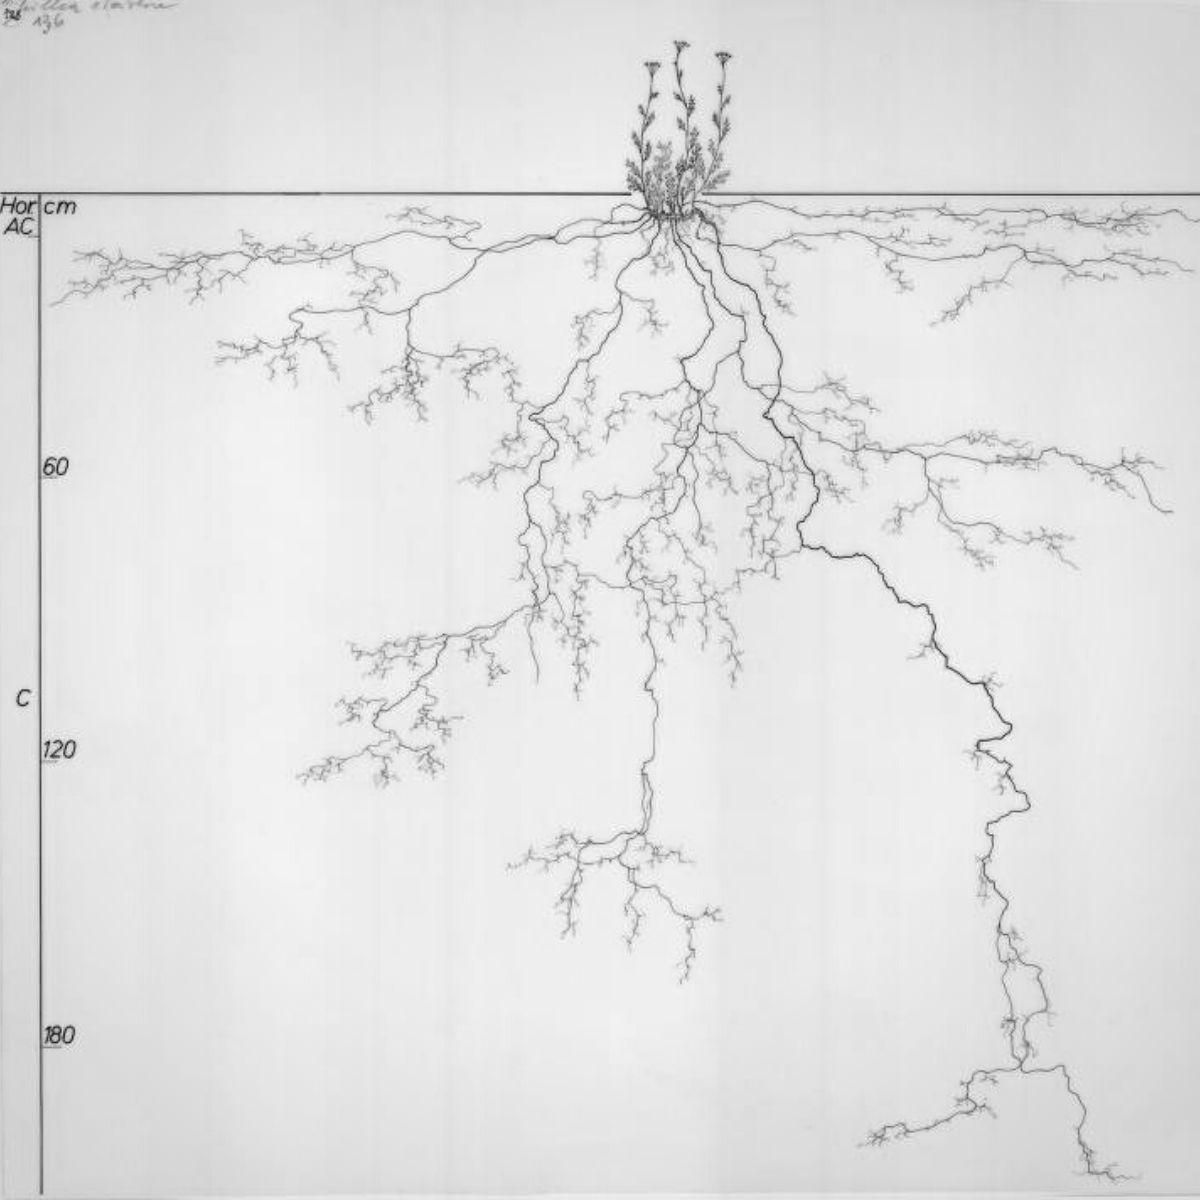 Complex root system shown in incredibly meticulous drawings on Thursd